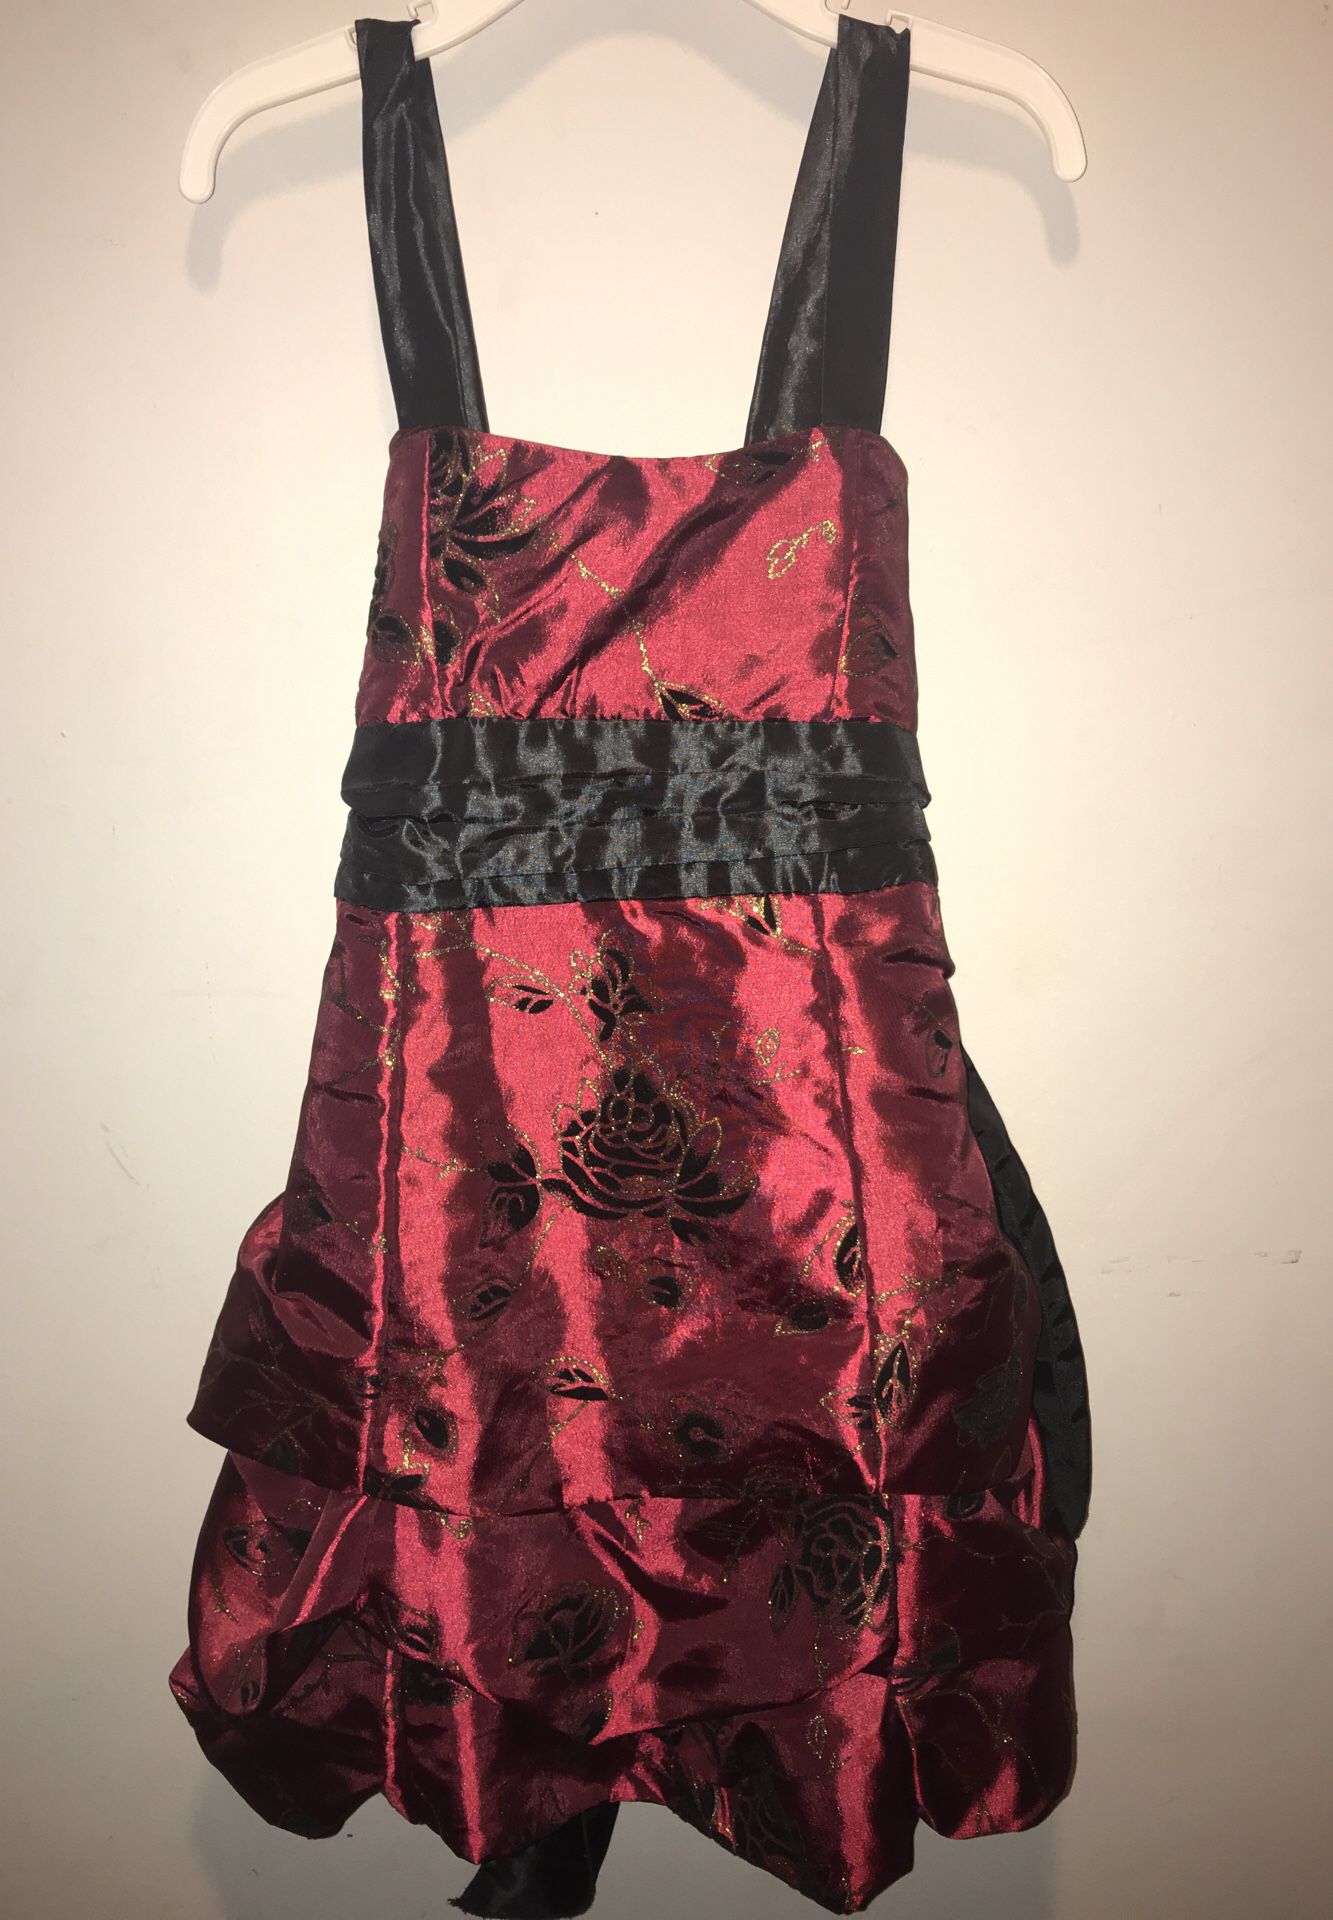 Girls dress 6 years old red black flowers.